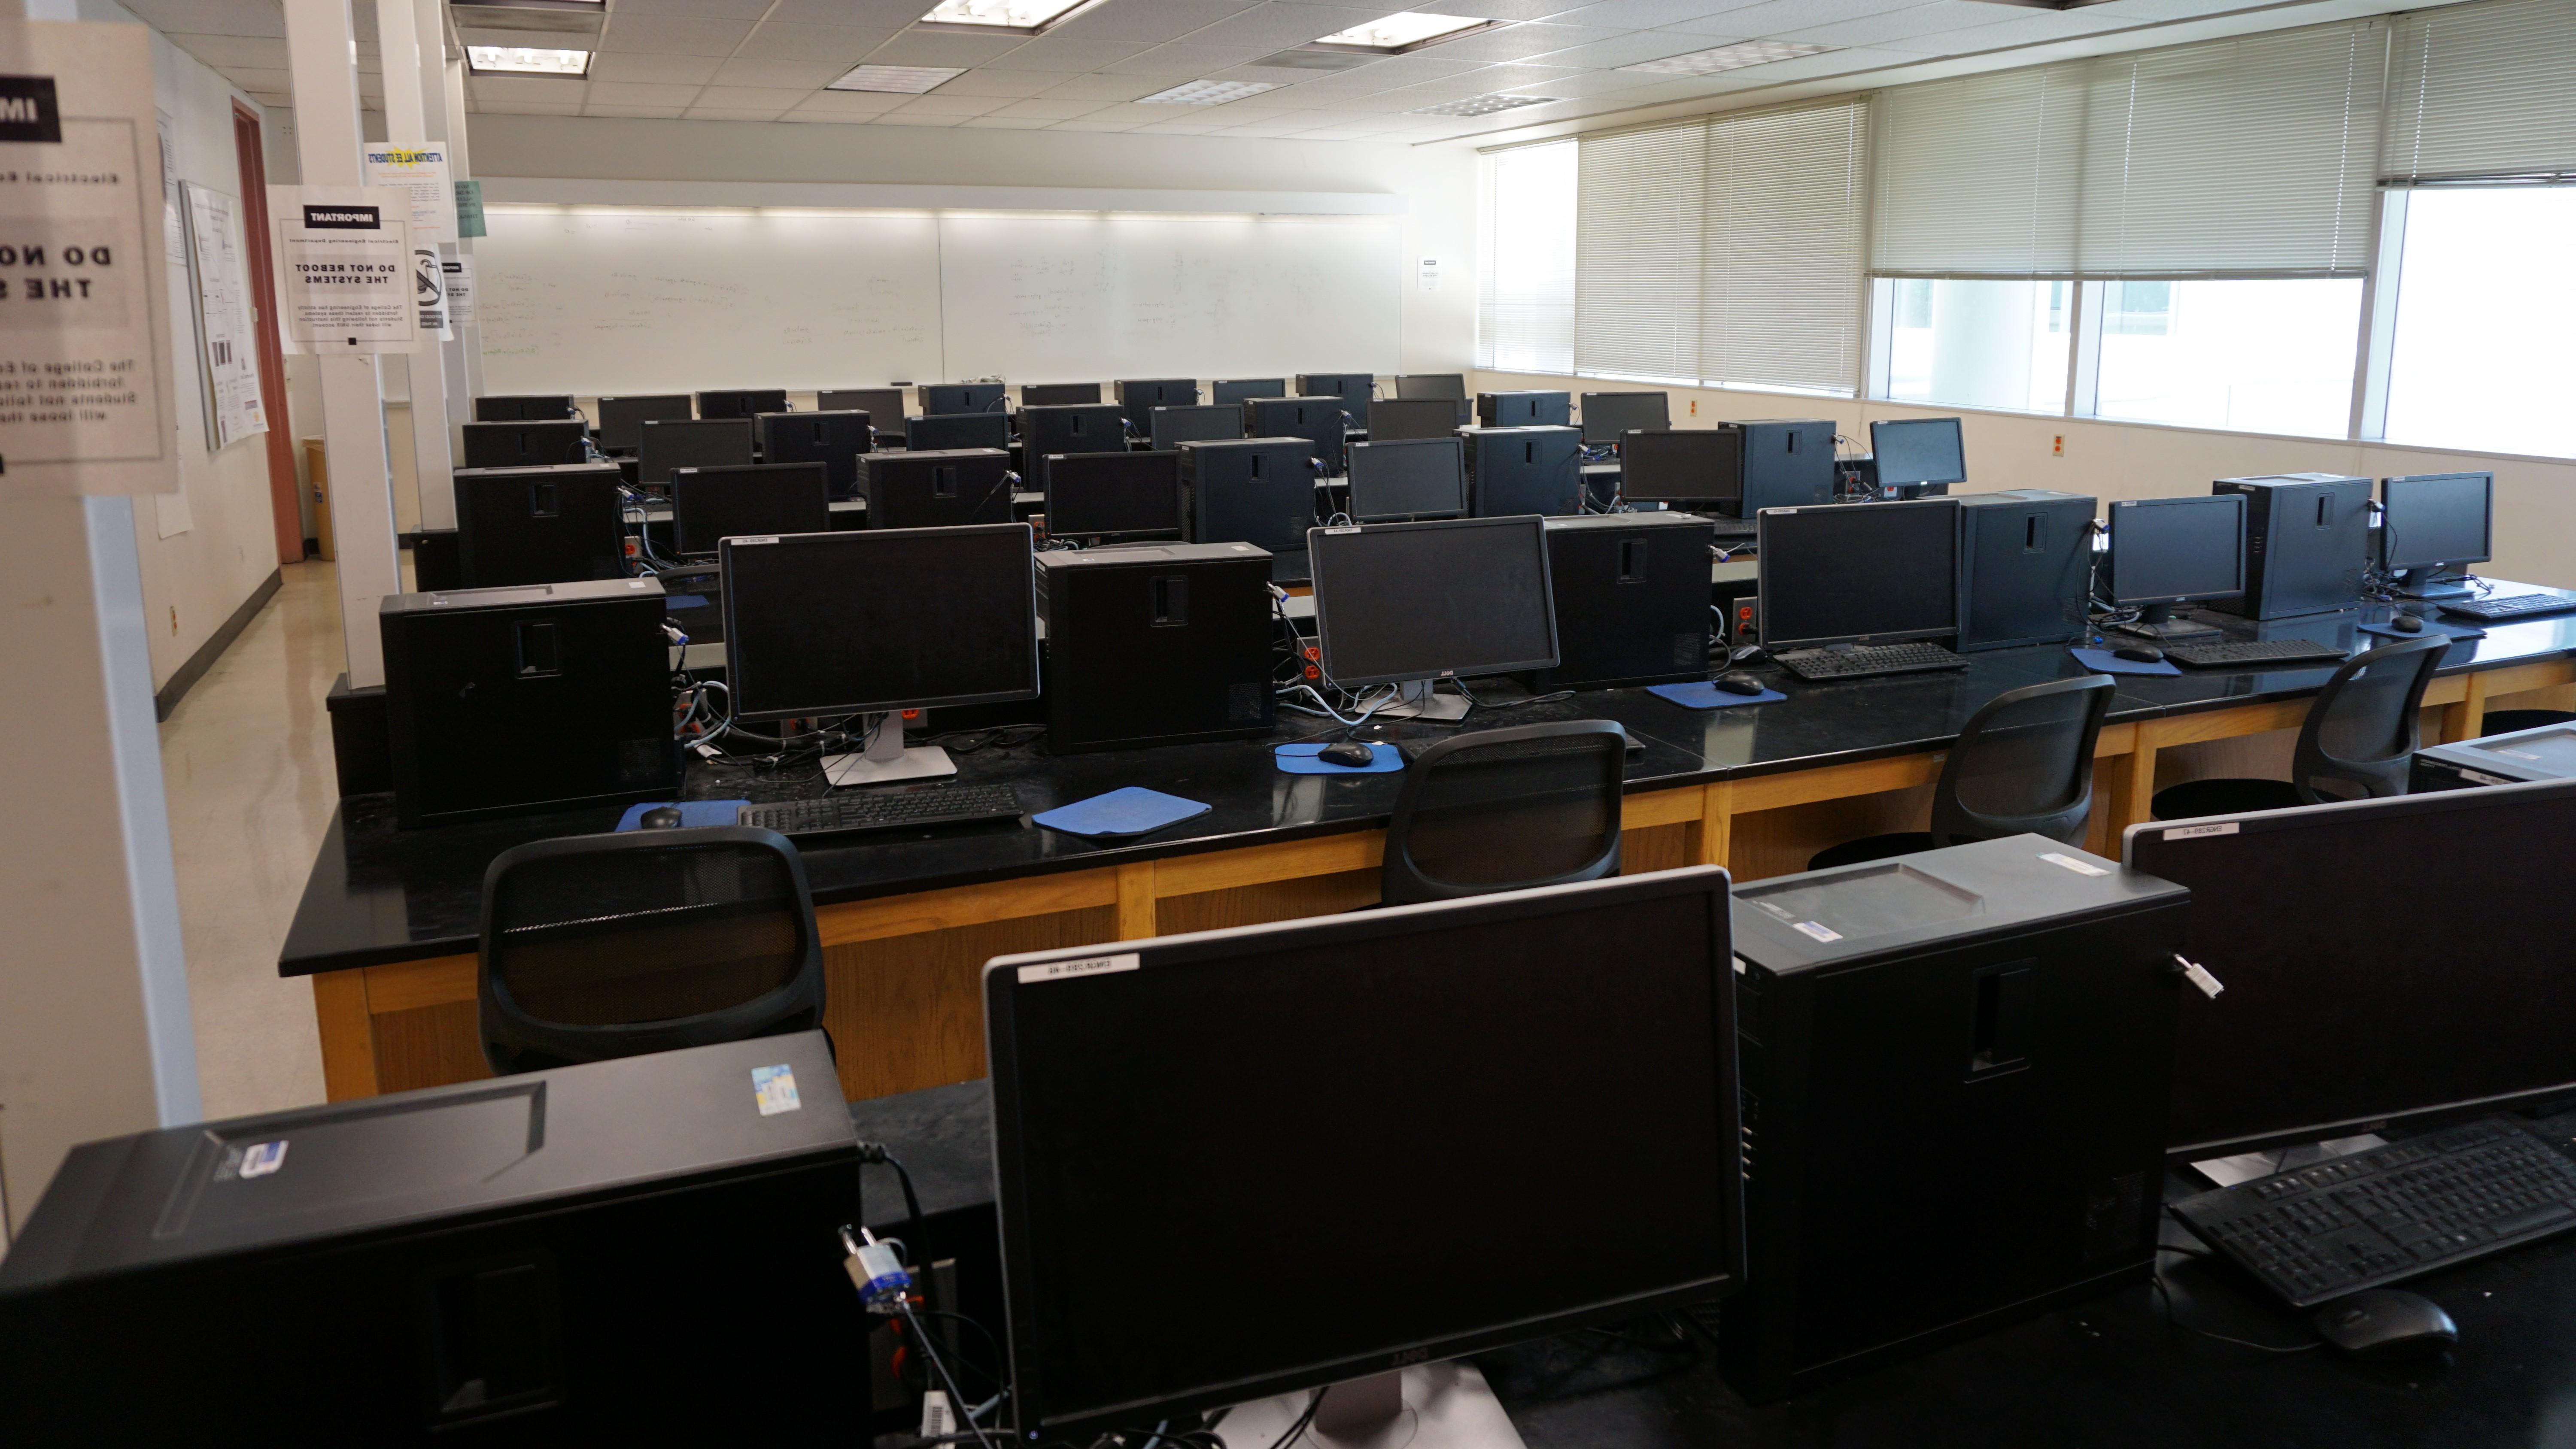 A classroom with multiple rows of computers and monitors.